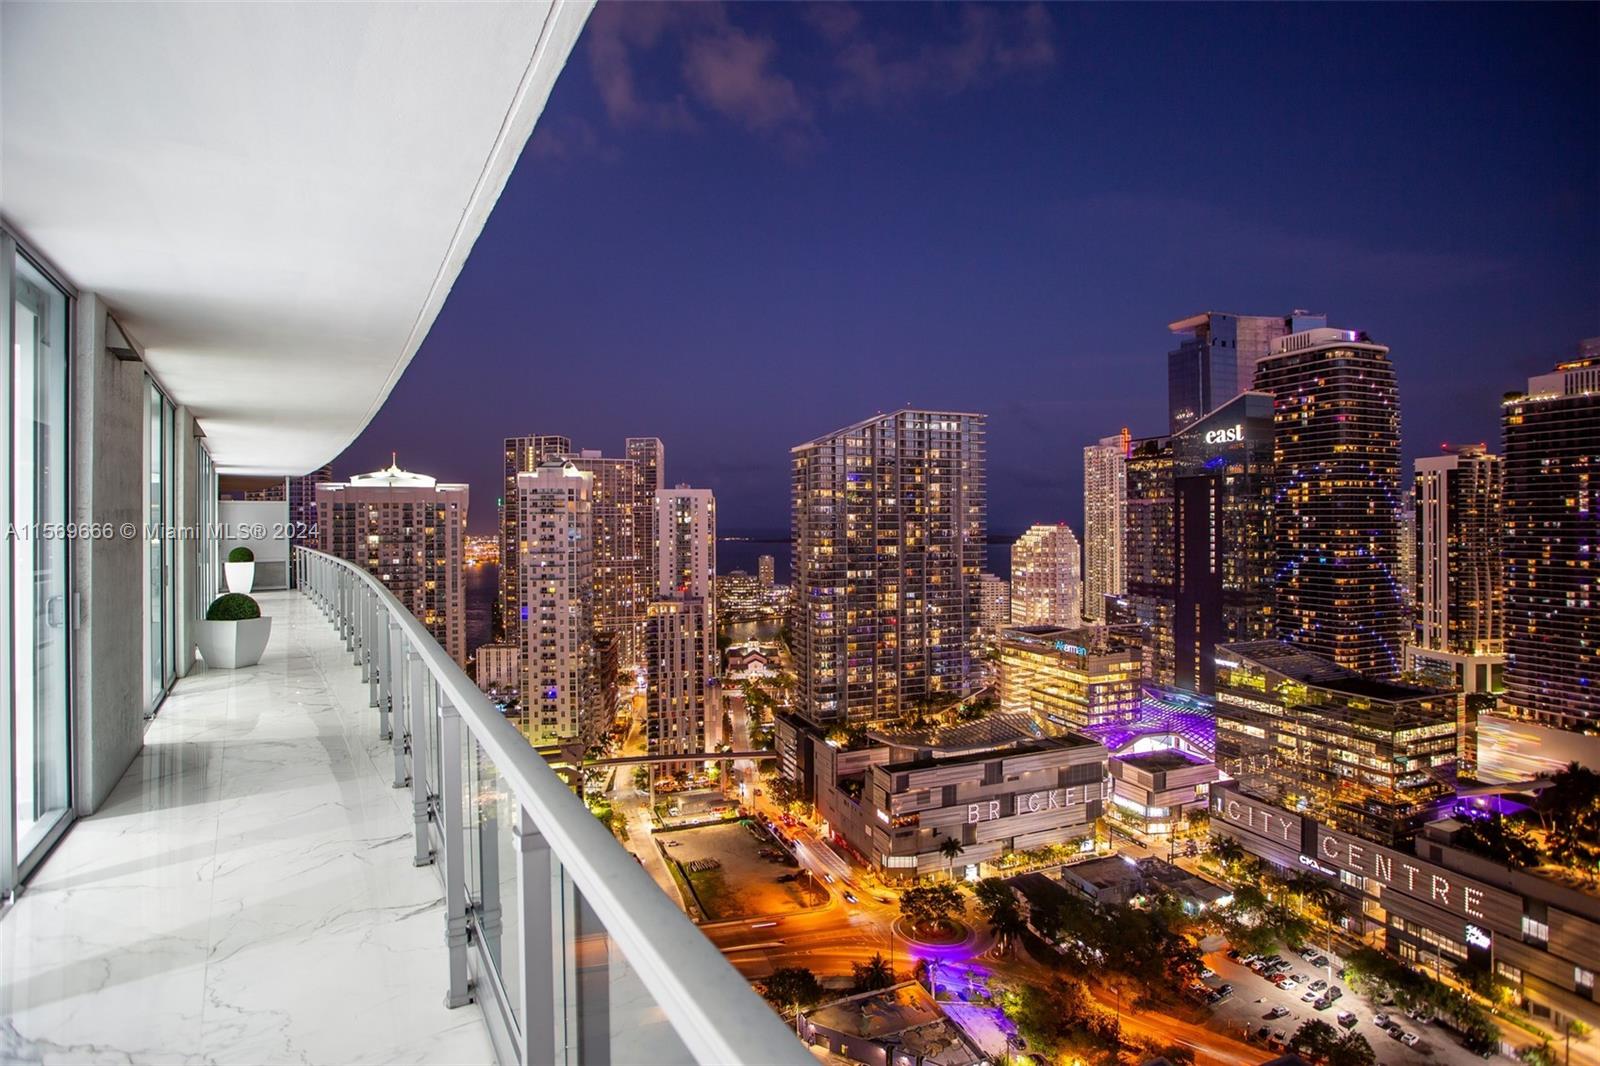 Impeccable 3 bed / 3.5 bath residence with 2,356 SF of living space overlooking magical views of the Bay and Brickell skyline. This unique condo is a combination of 2 units converted into one spacious home. Upon entry, you’re greeted w/ large entertaining spaces looking out to picture perfect views. Kitchen features Bosch appliances, a large island, & built in TV. Formal Dining room has butlers pantry w/ wine fridge overlooking city & bay views. Both secondary bedrooms are ensuite w/ spacious custom closets. Oversized primary bedroom has a large walk-in closet & bathroom w/ double vanity, shower, & private water closet. Spacious formal laundry room w/ utility sink. Electric blinds, built in ceiling speakers, 2 assigned parking, HUGE storage, Custom Italian Wood Doors. That Brickell Life!